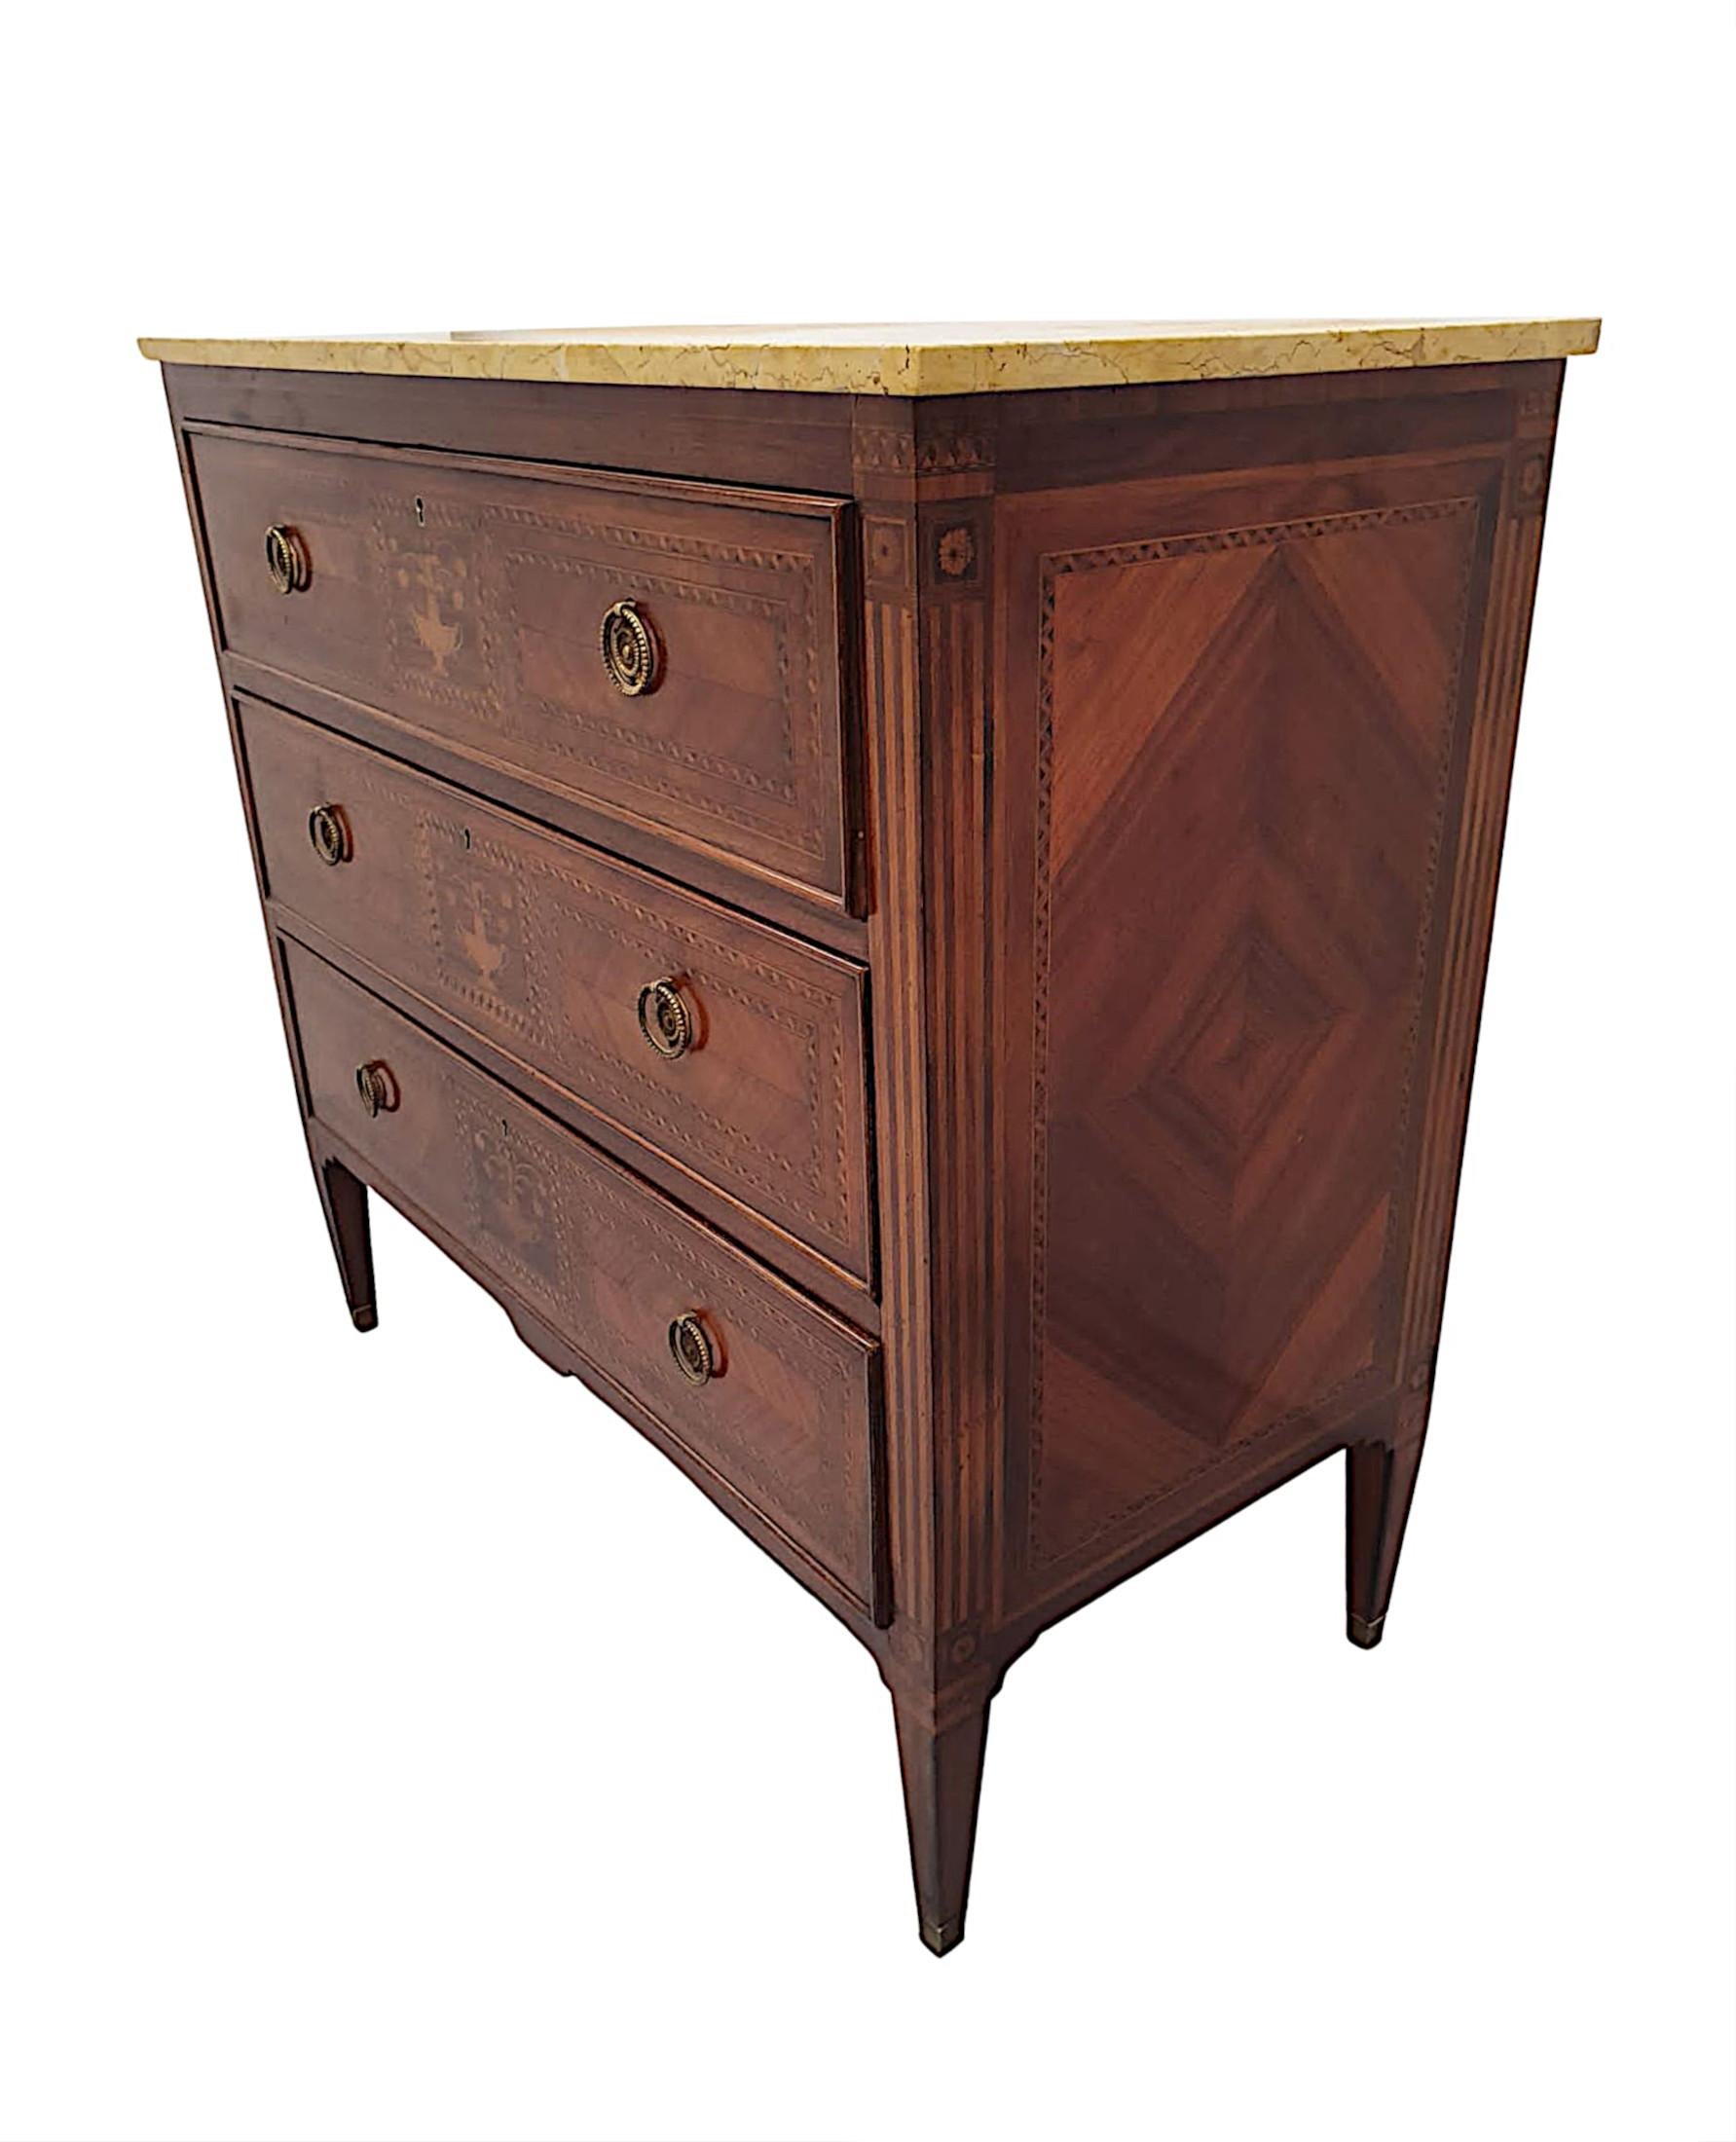 A fine early 20th Century richly patinated marble top chest of drawers, of fabulous quality, finely carved, crossbanded, quarter veneered and with stunning, highly inlaid marquetry panels throughout.  The gorgeous, moulded Sienna marble top of